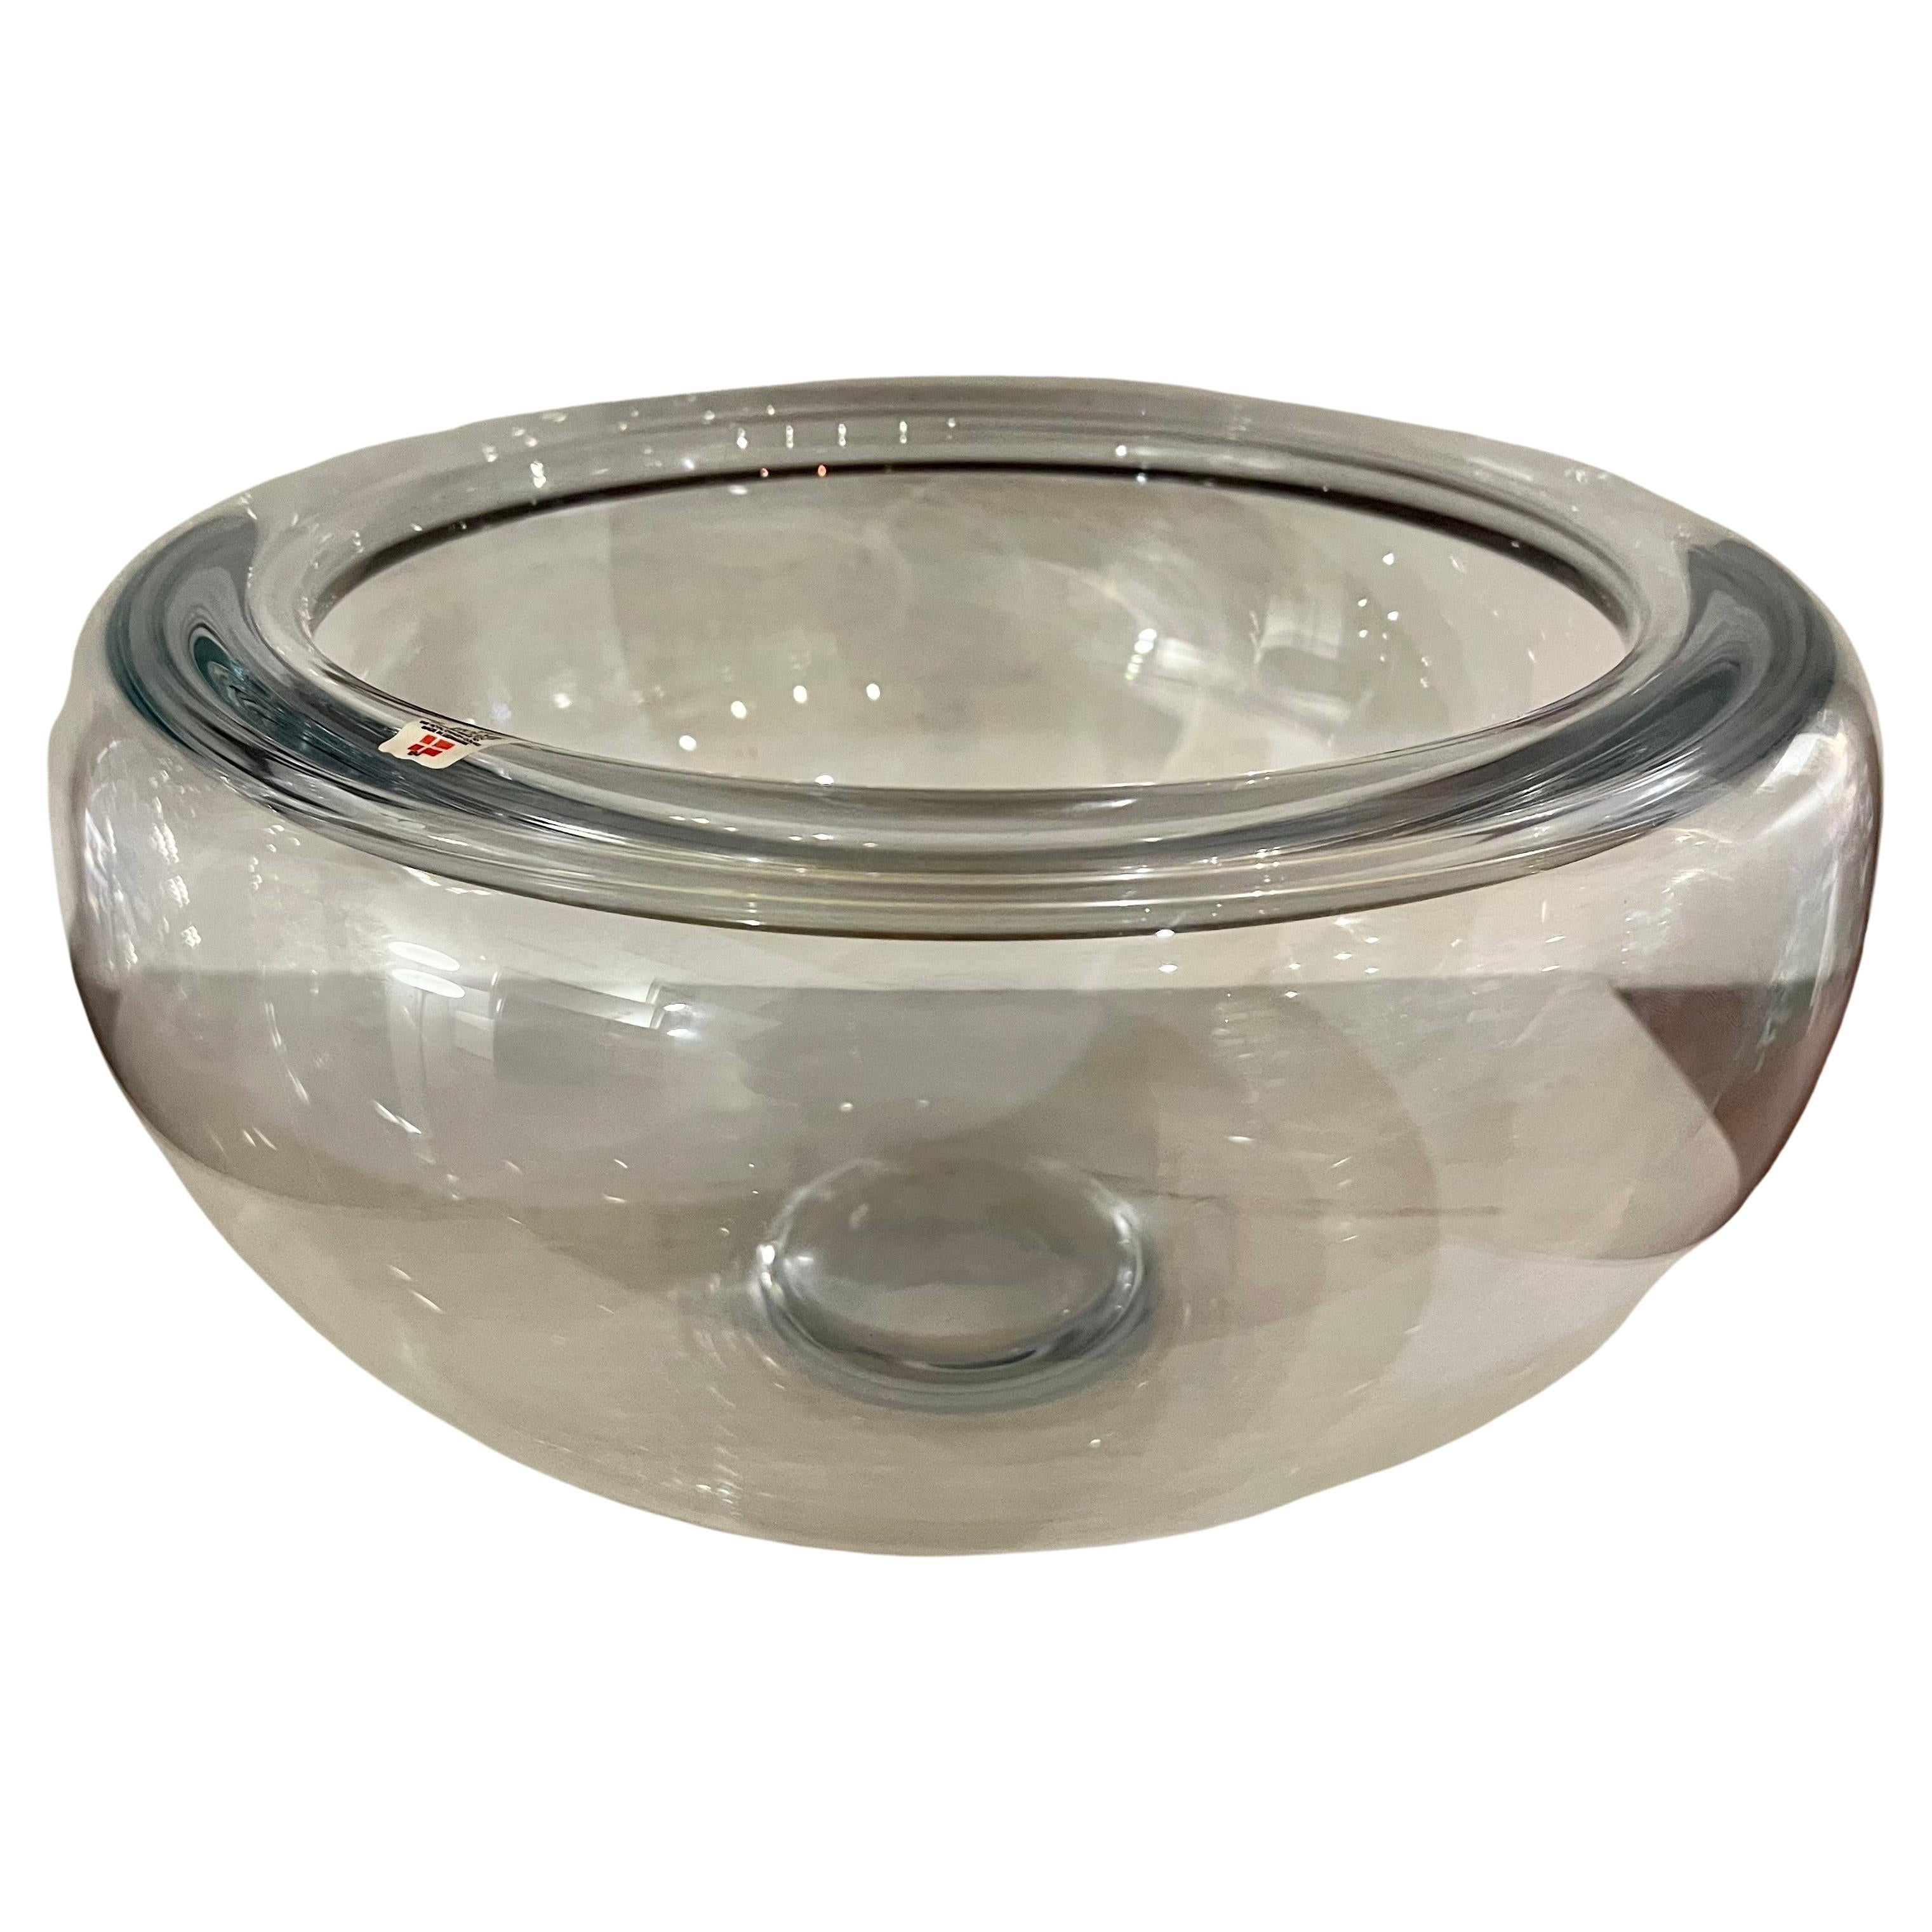 A very attractive hand-blown clear glass extra large centerpiece bowl by Per Lutken for Holmegaard, circa the 1980s. The bowl retains the label and it's in excellent condition with no chips cracks or scratches.

